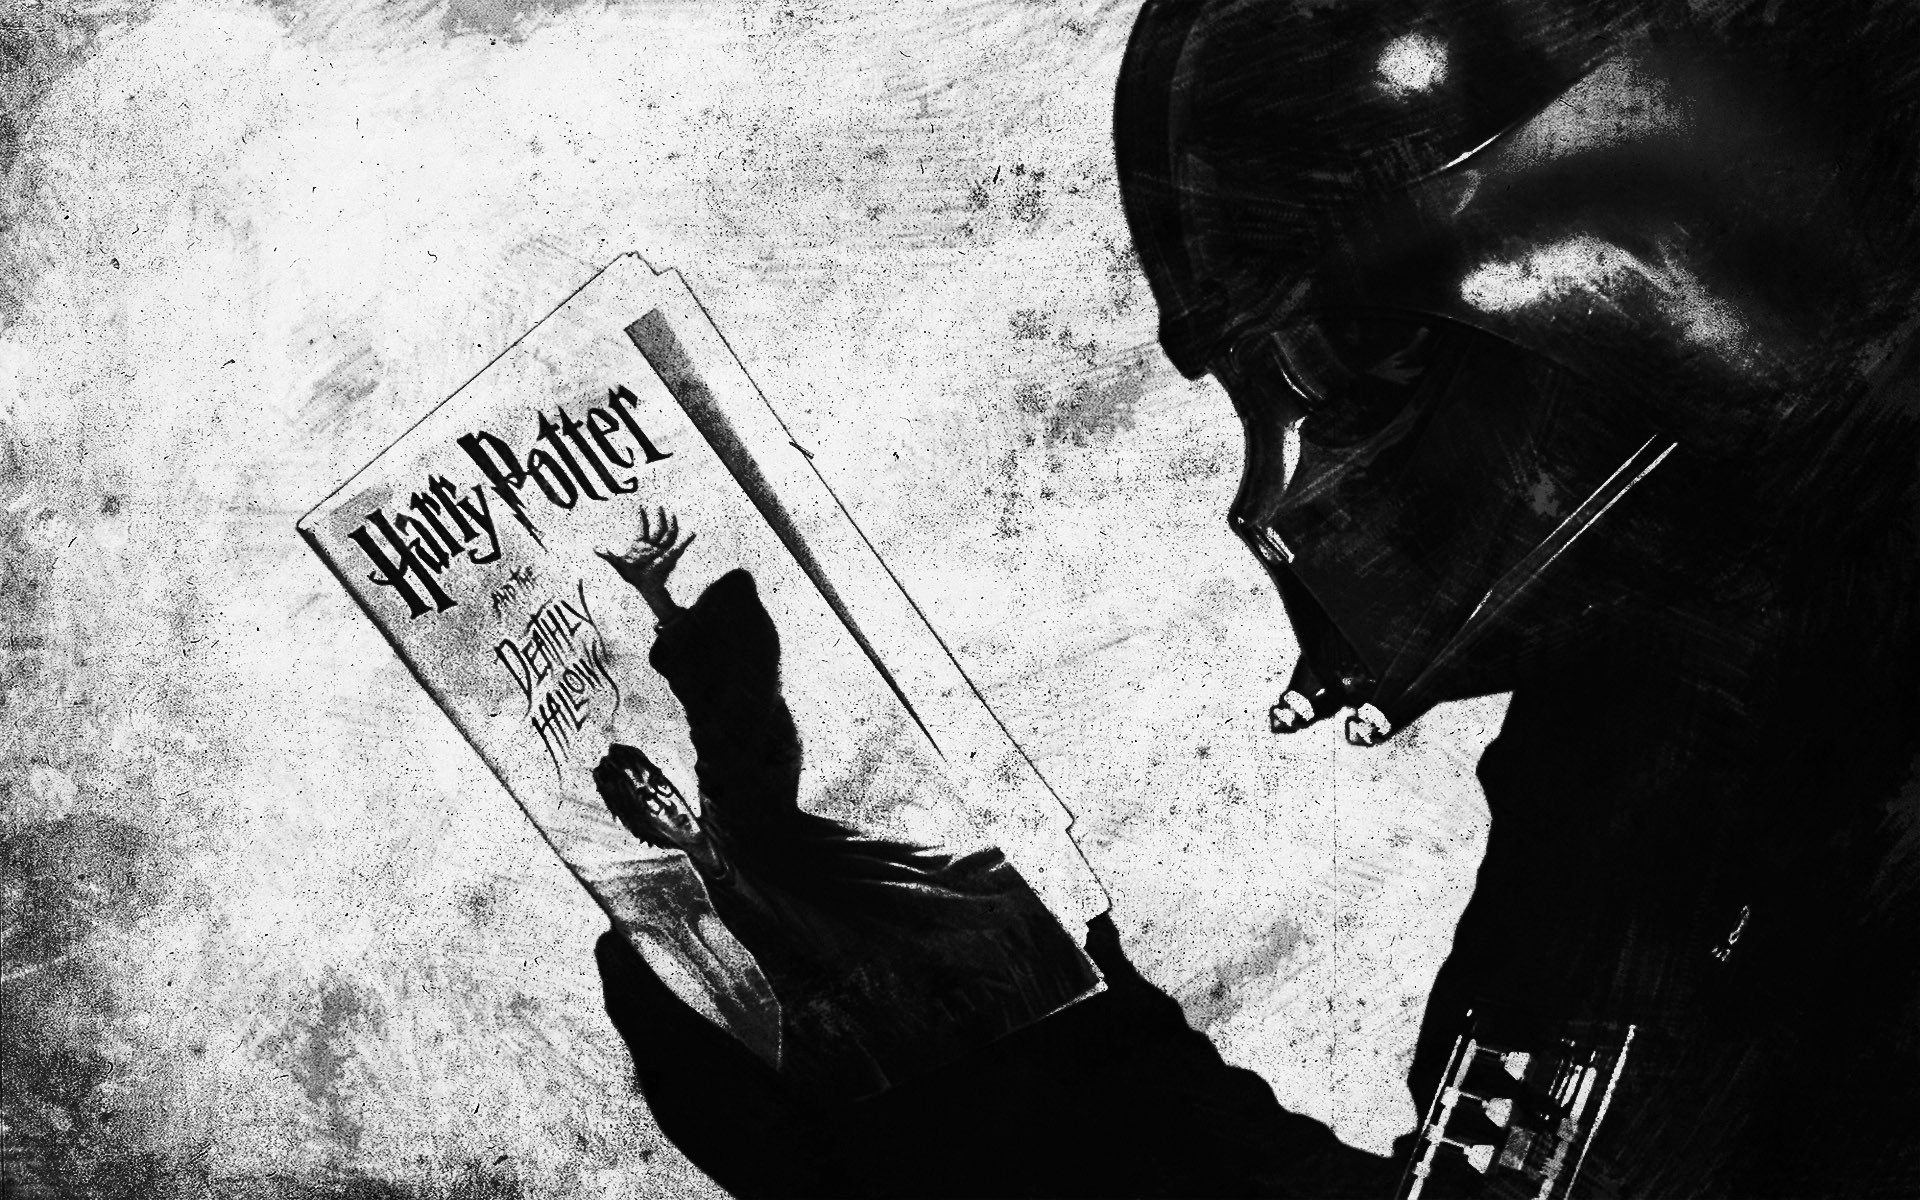 Star Wars Darth Vader Harry Potter And The Deathly Hallows Humor Harry Potter Monochrome Mix Up Sith 1920x1200